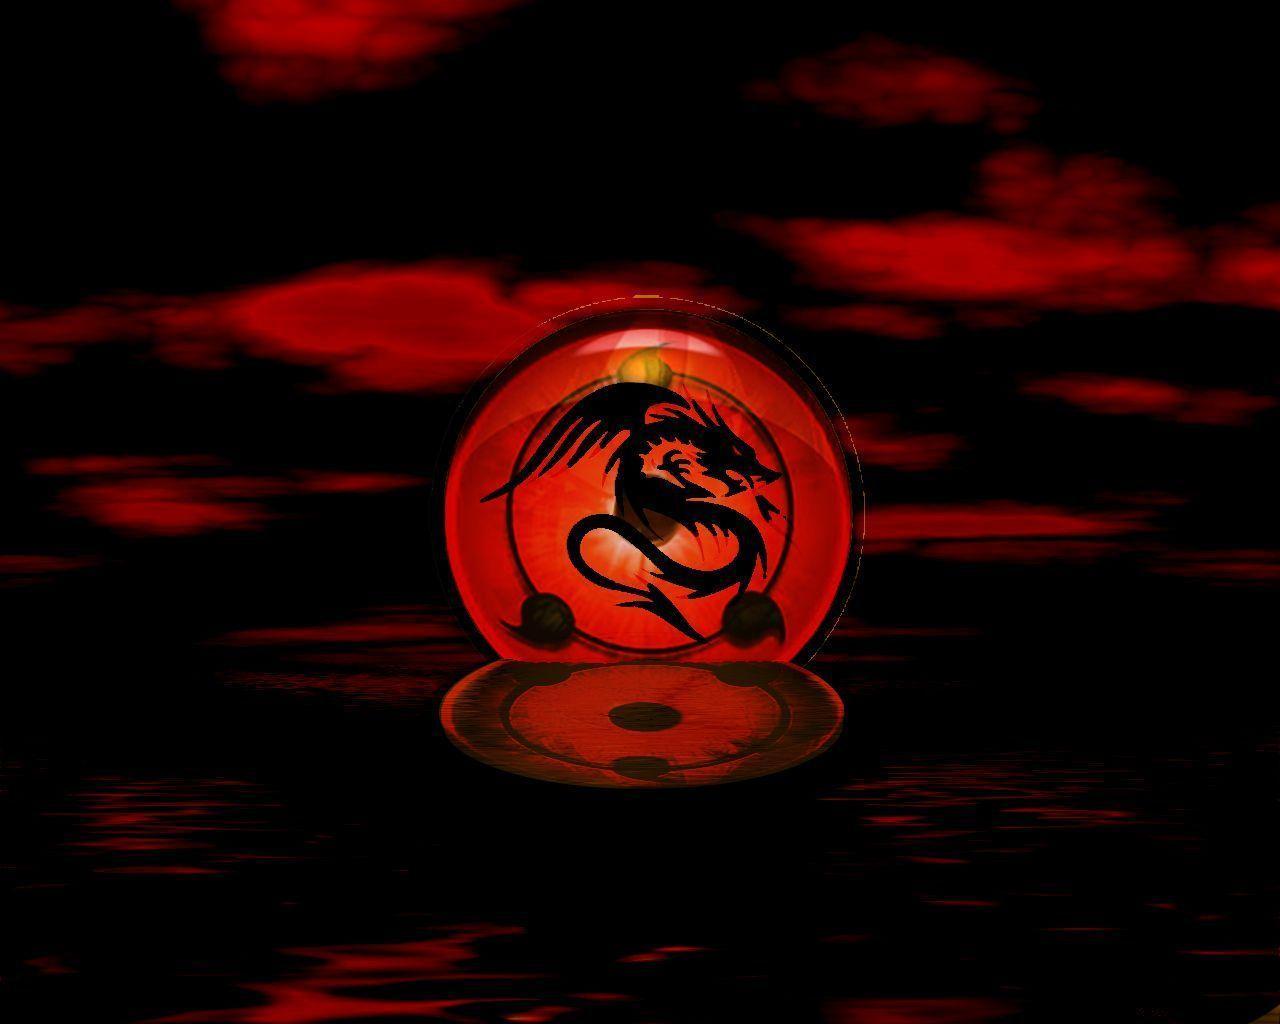 Red Dragons wallpaper. Red Dragons background